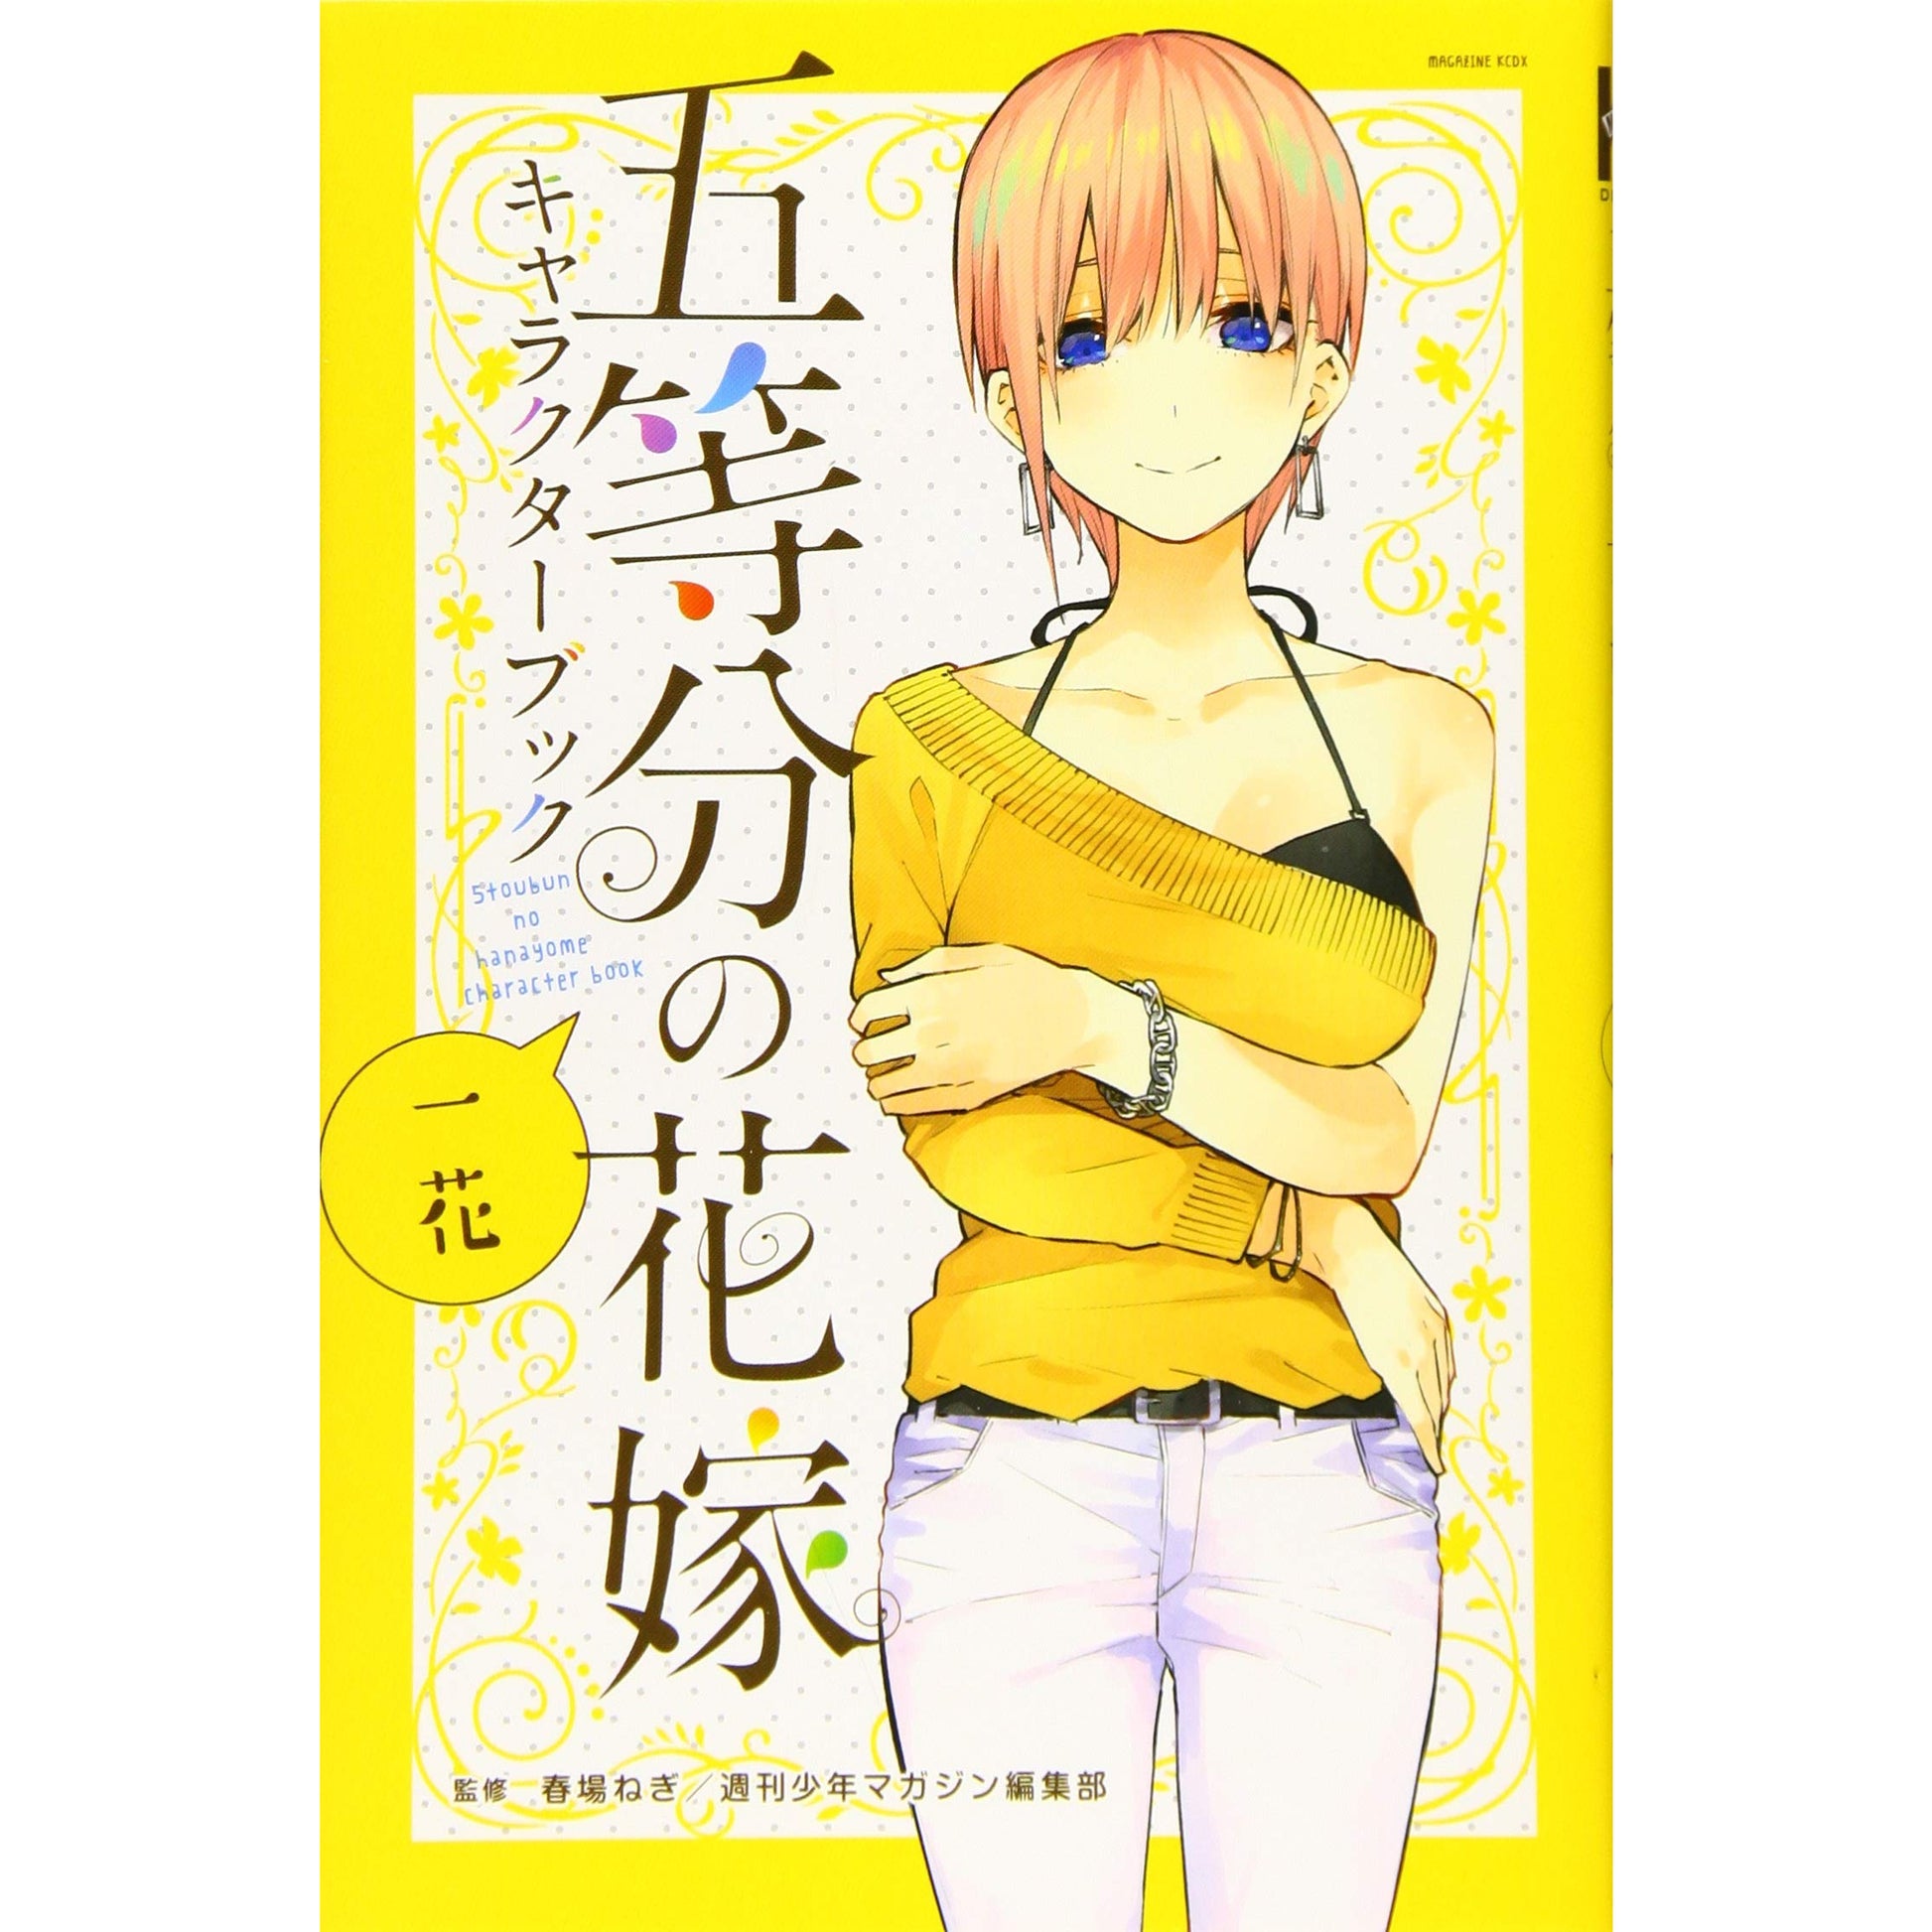 The Quintessential Quintuplets Character Book & Anime Season 1 Officia –  GLIT Japanese Hobby Shop